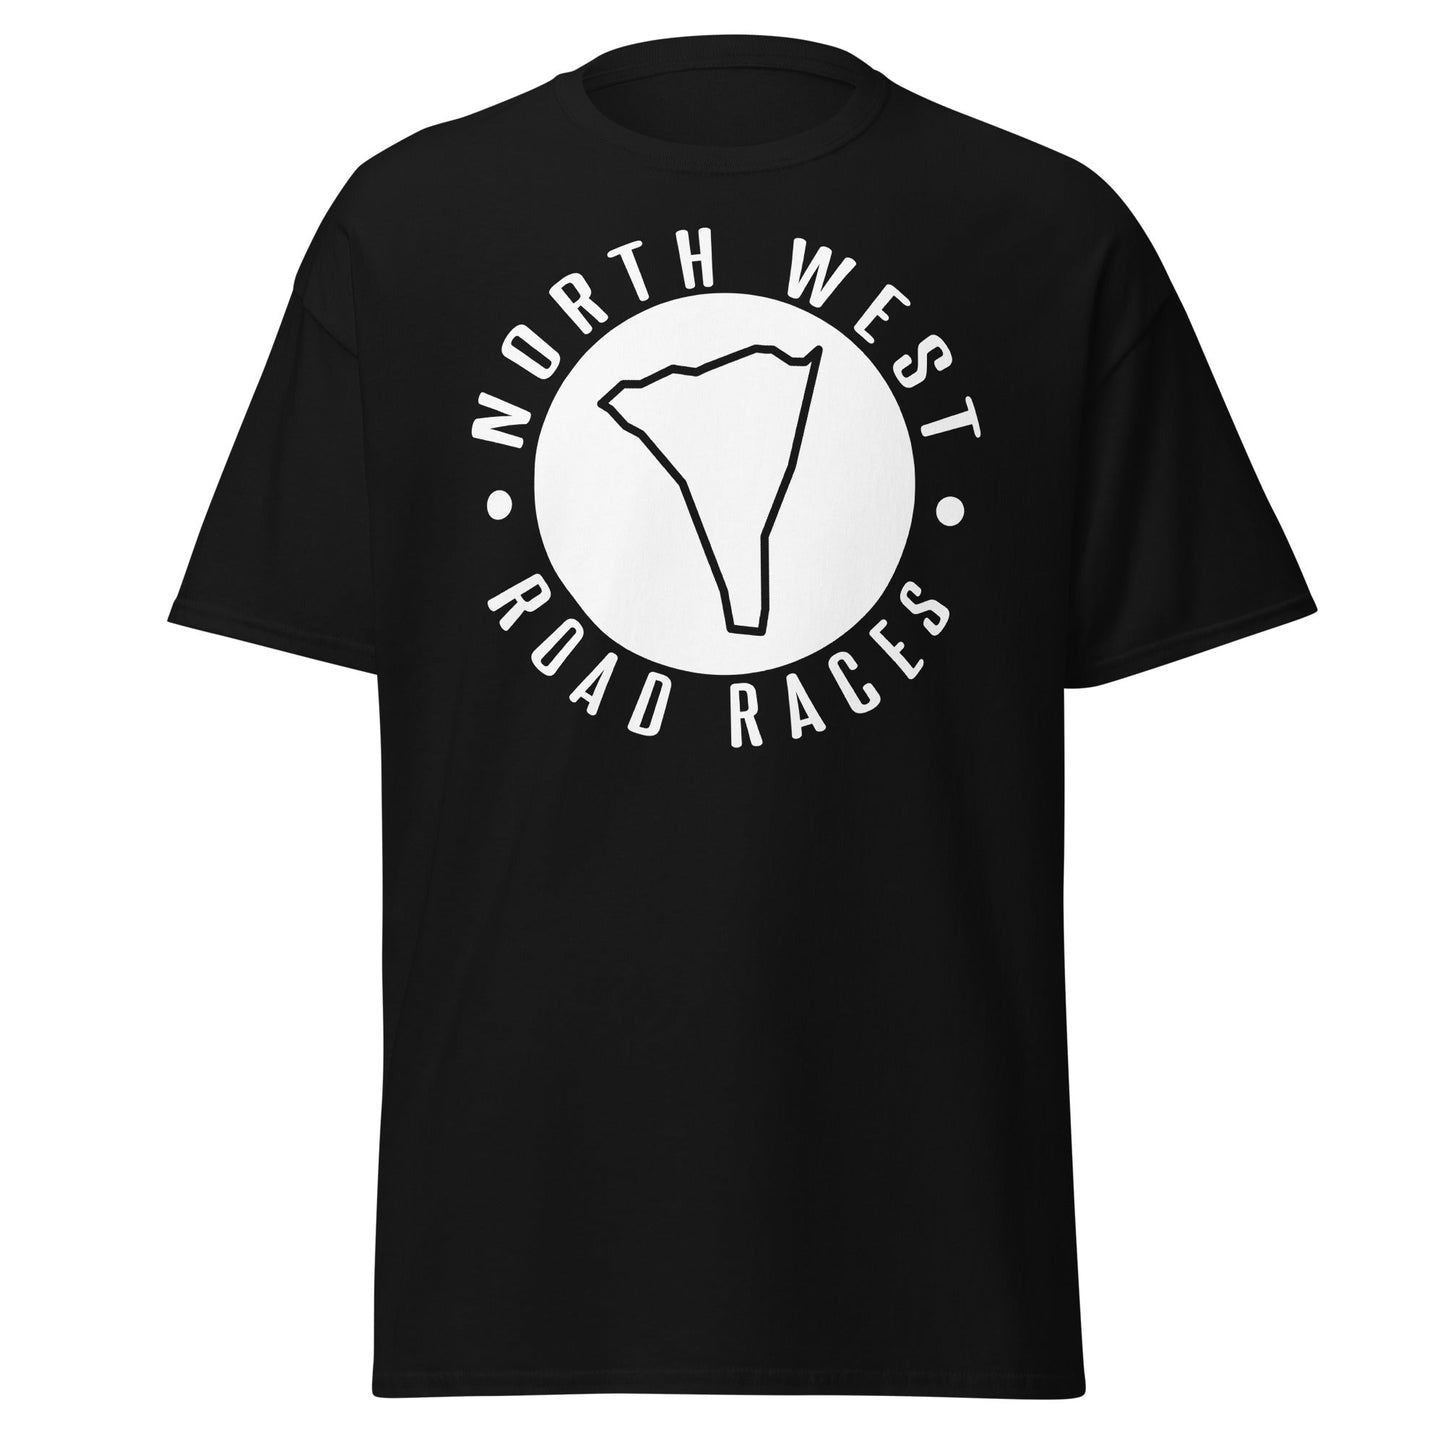 North West 200 Road Races T Shirt (Black) - Rotherhams